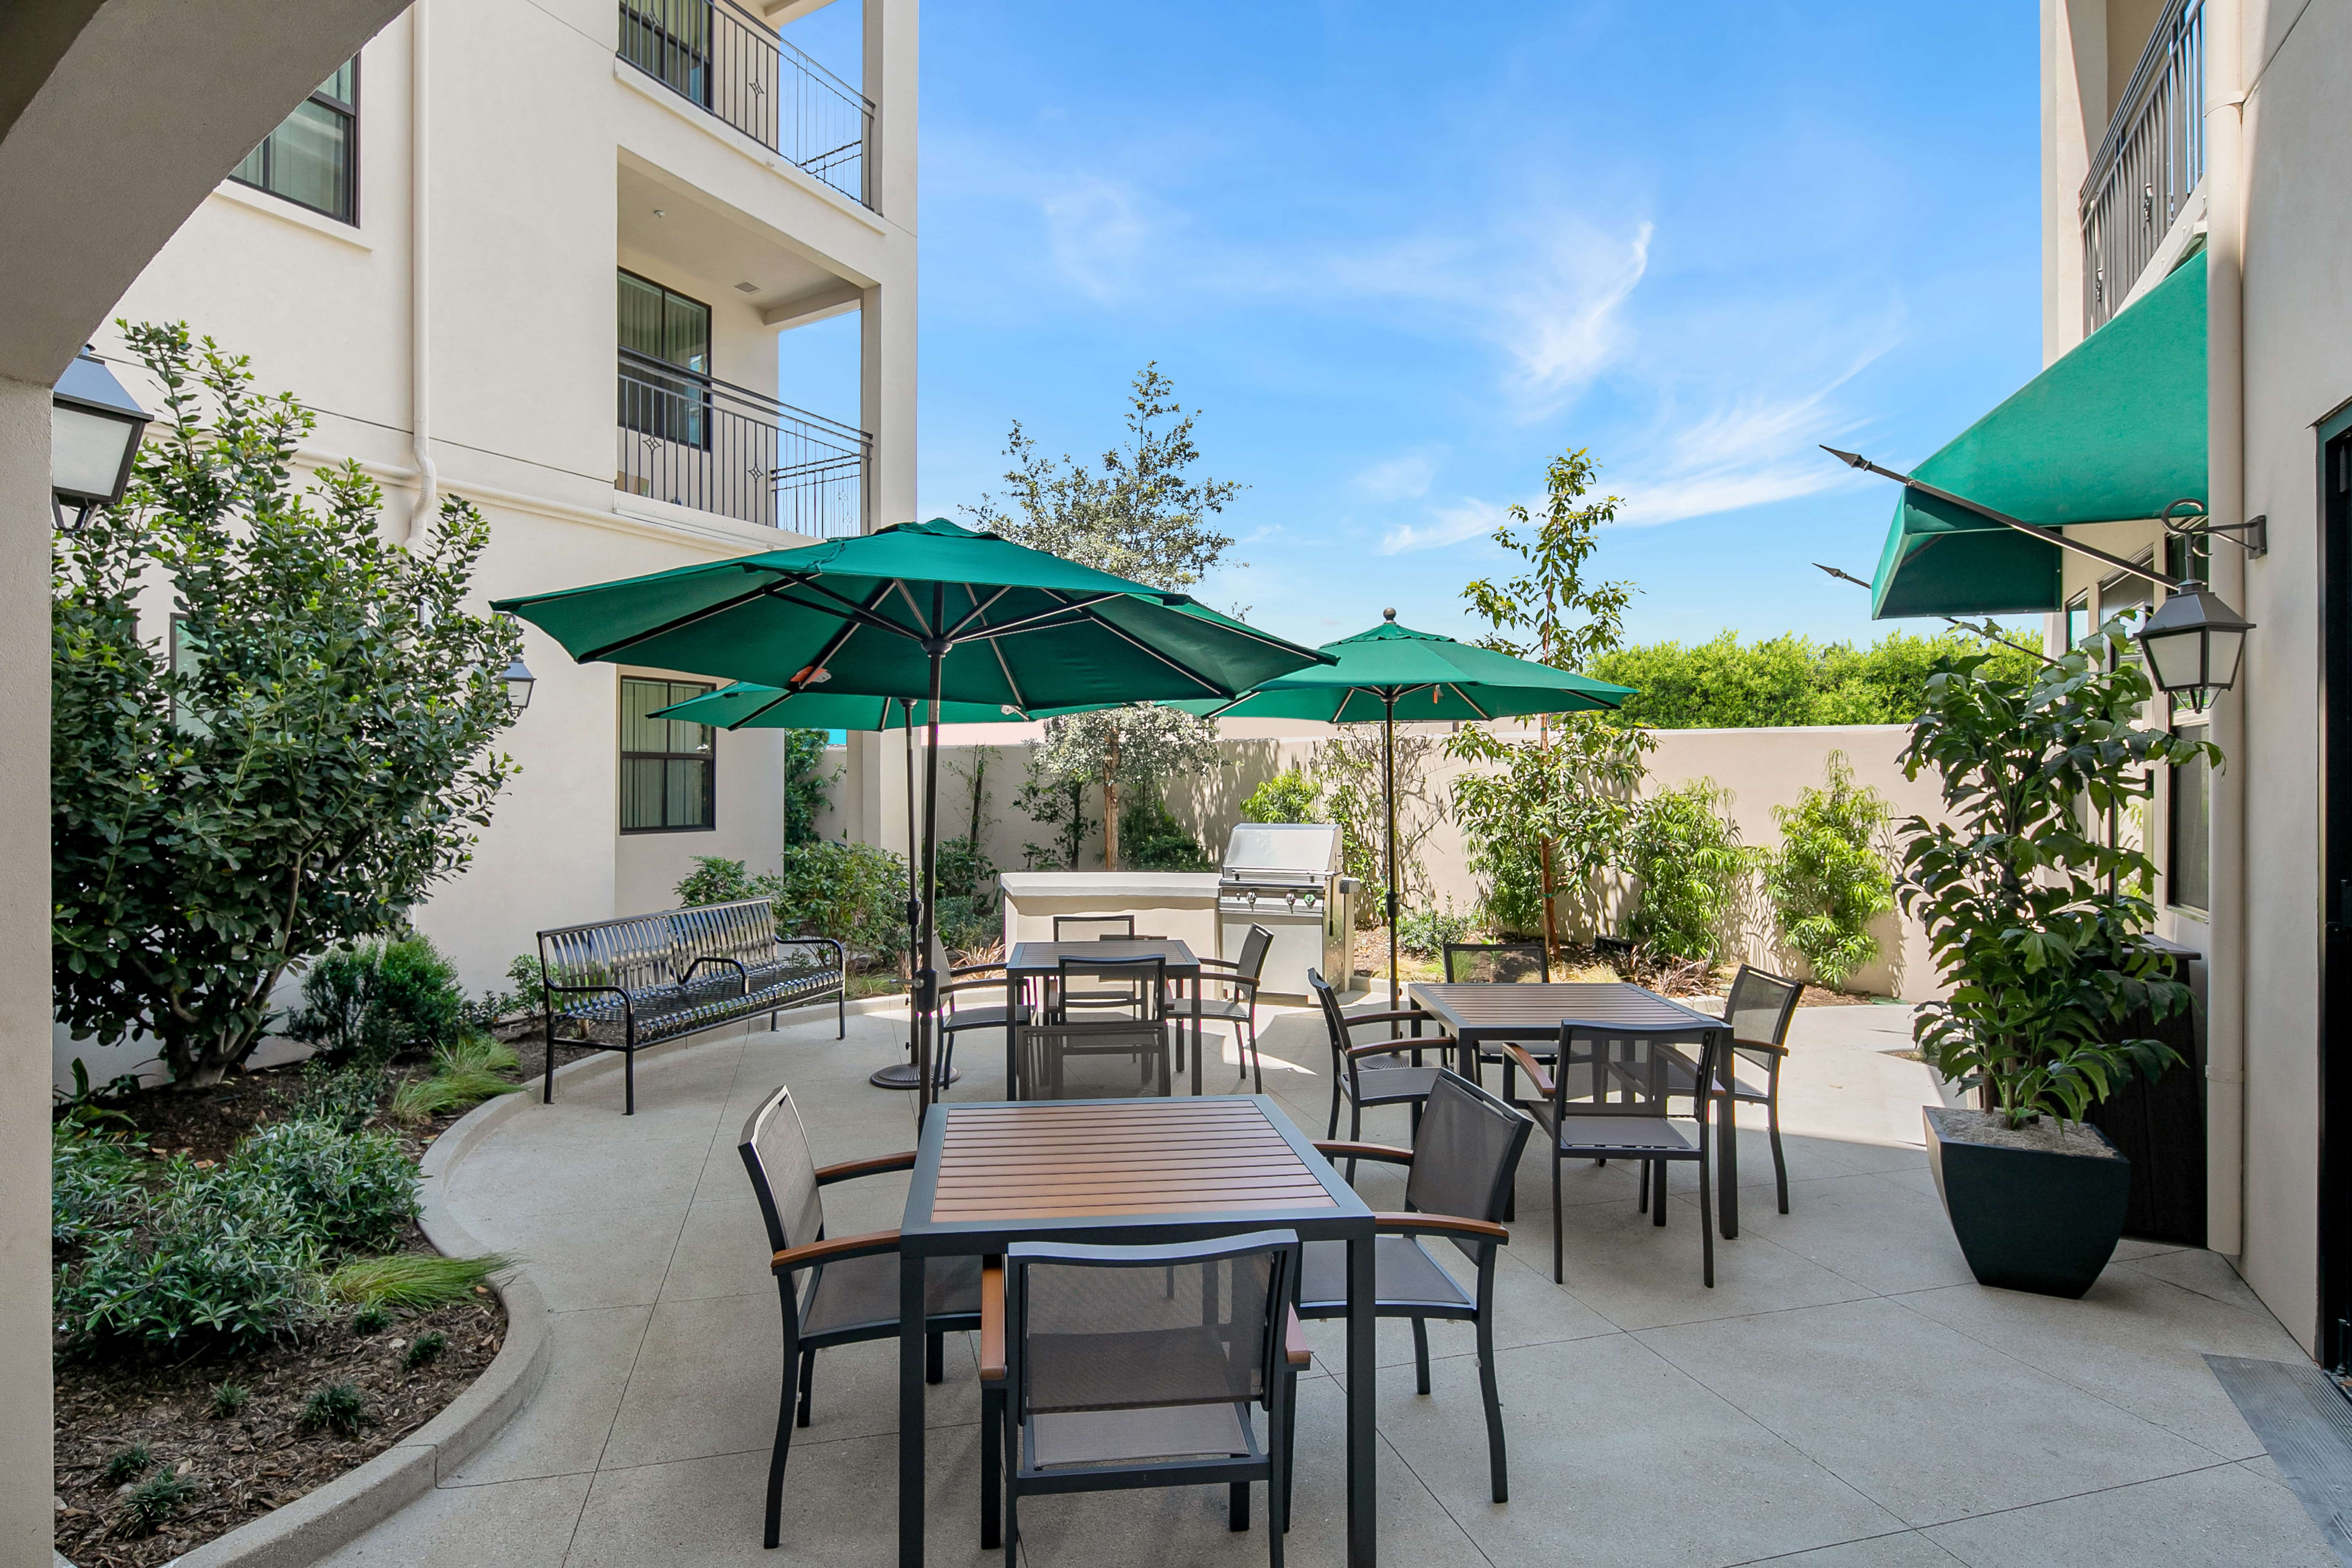 Outdoor patio and barbecue with three tables, two umbrellas, surrounded by flowerbeds.